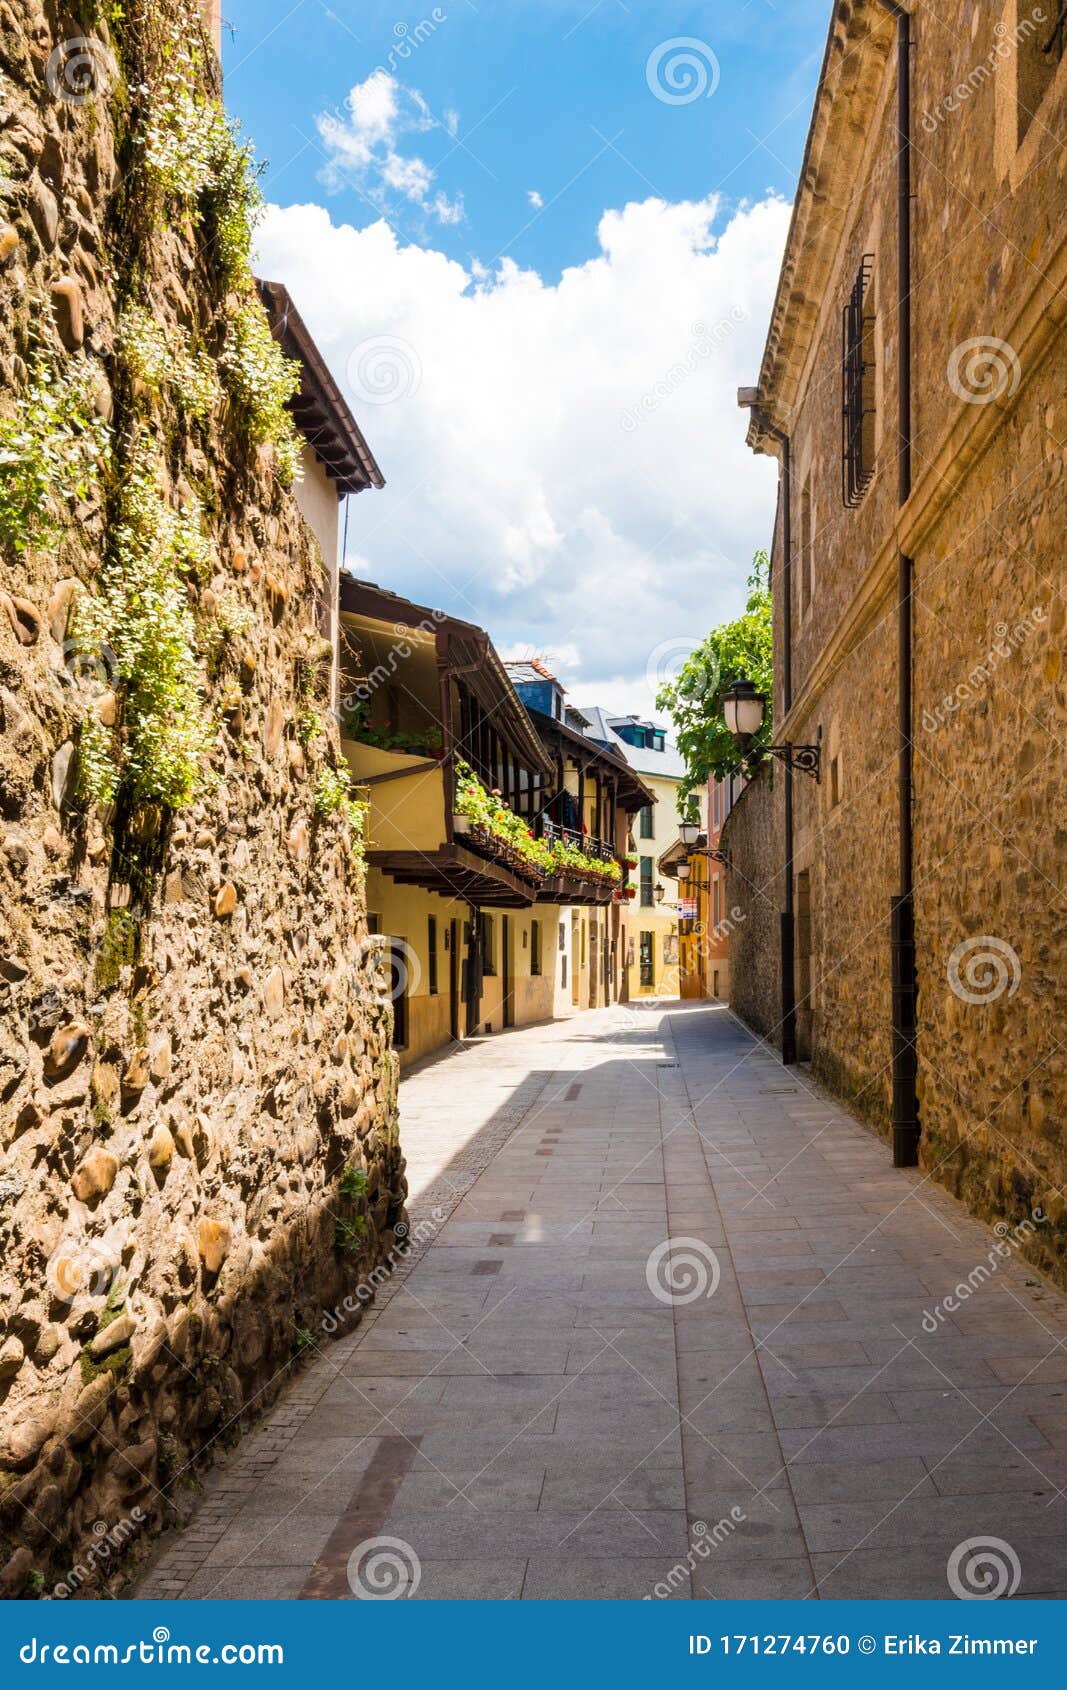 houses and streets of ponferrada